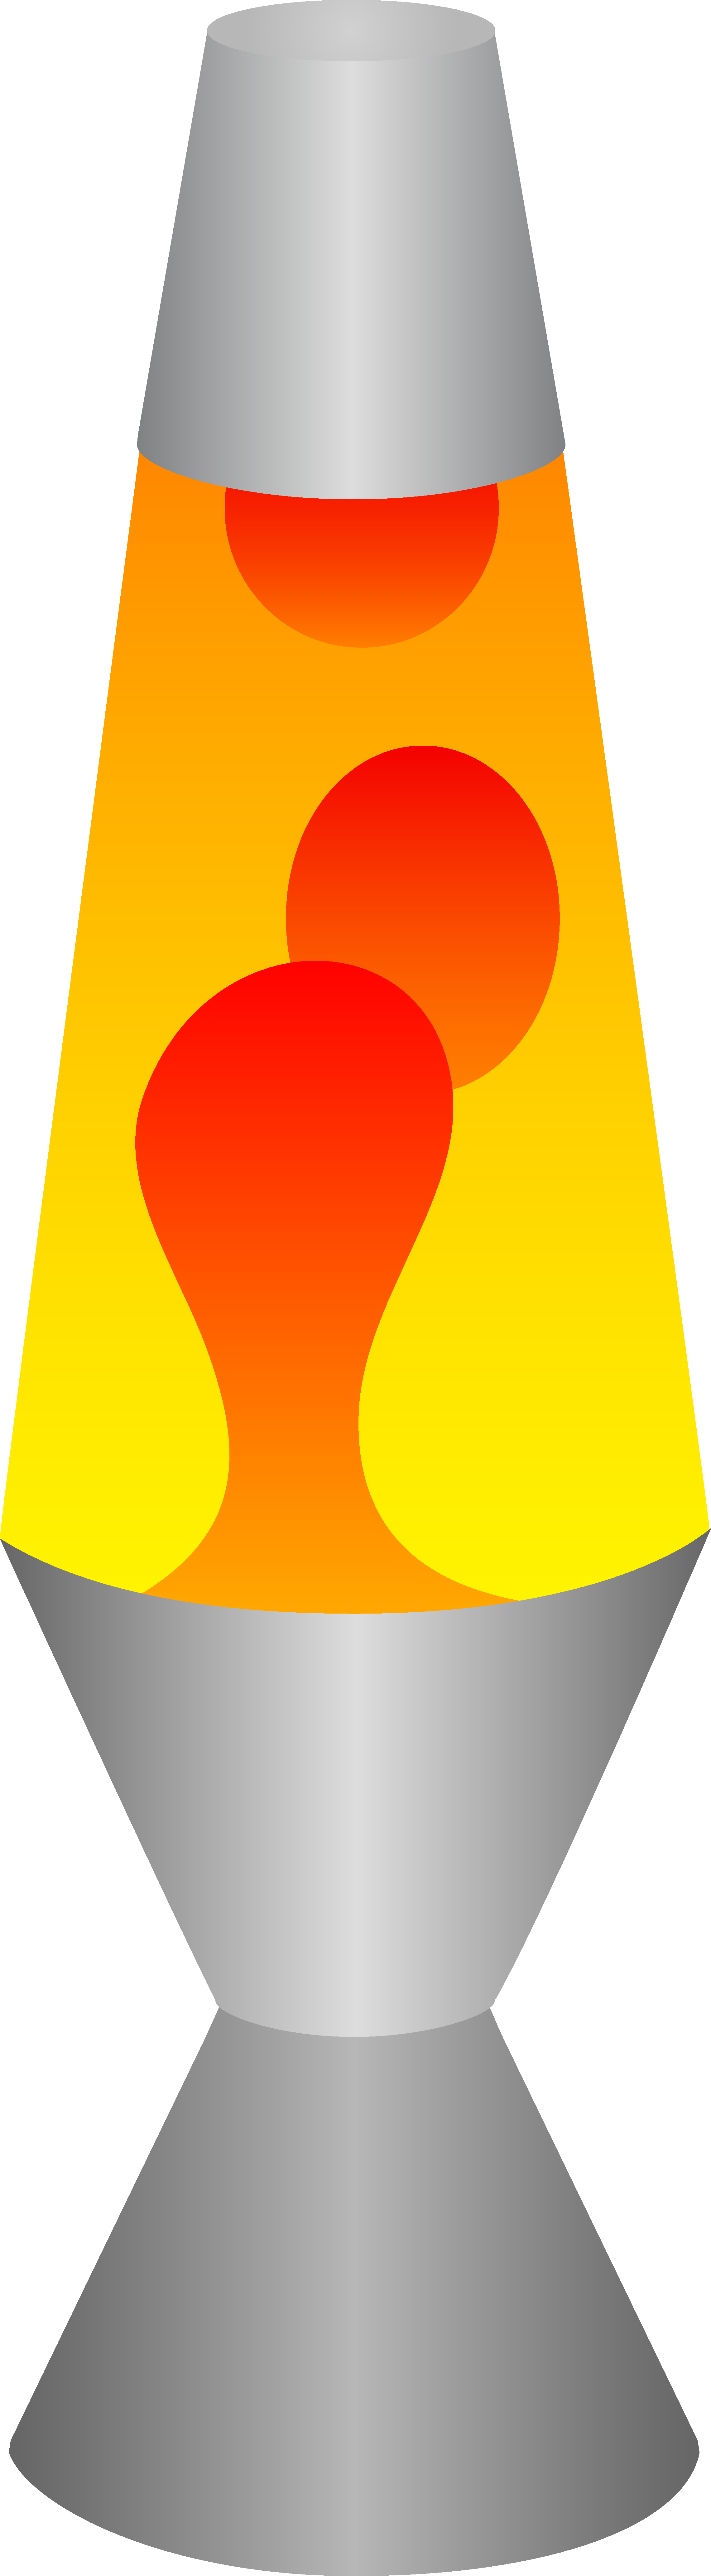 Idea clipart lamp. Oil flame png the